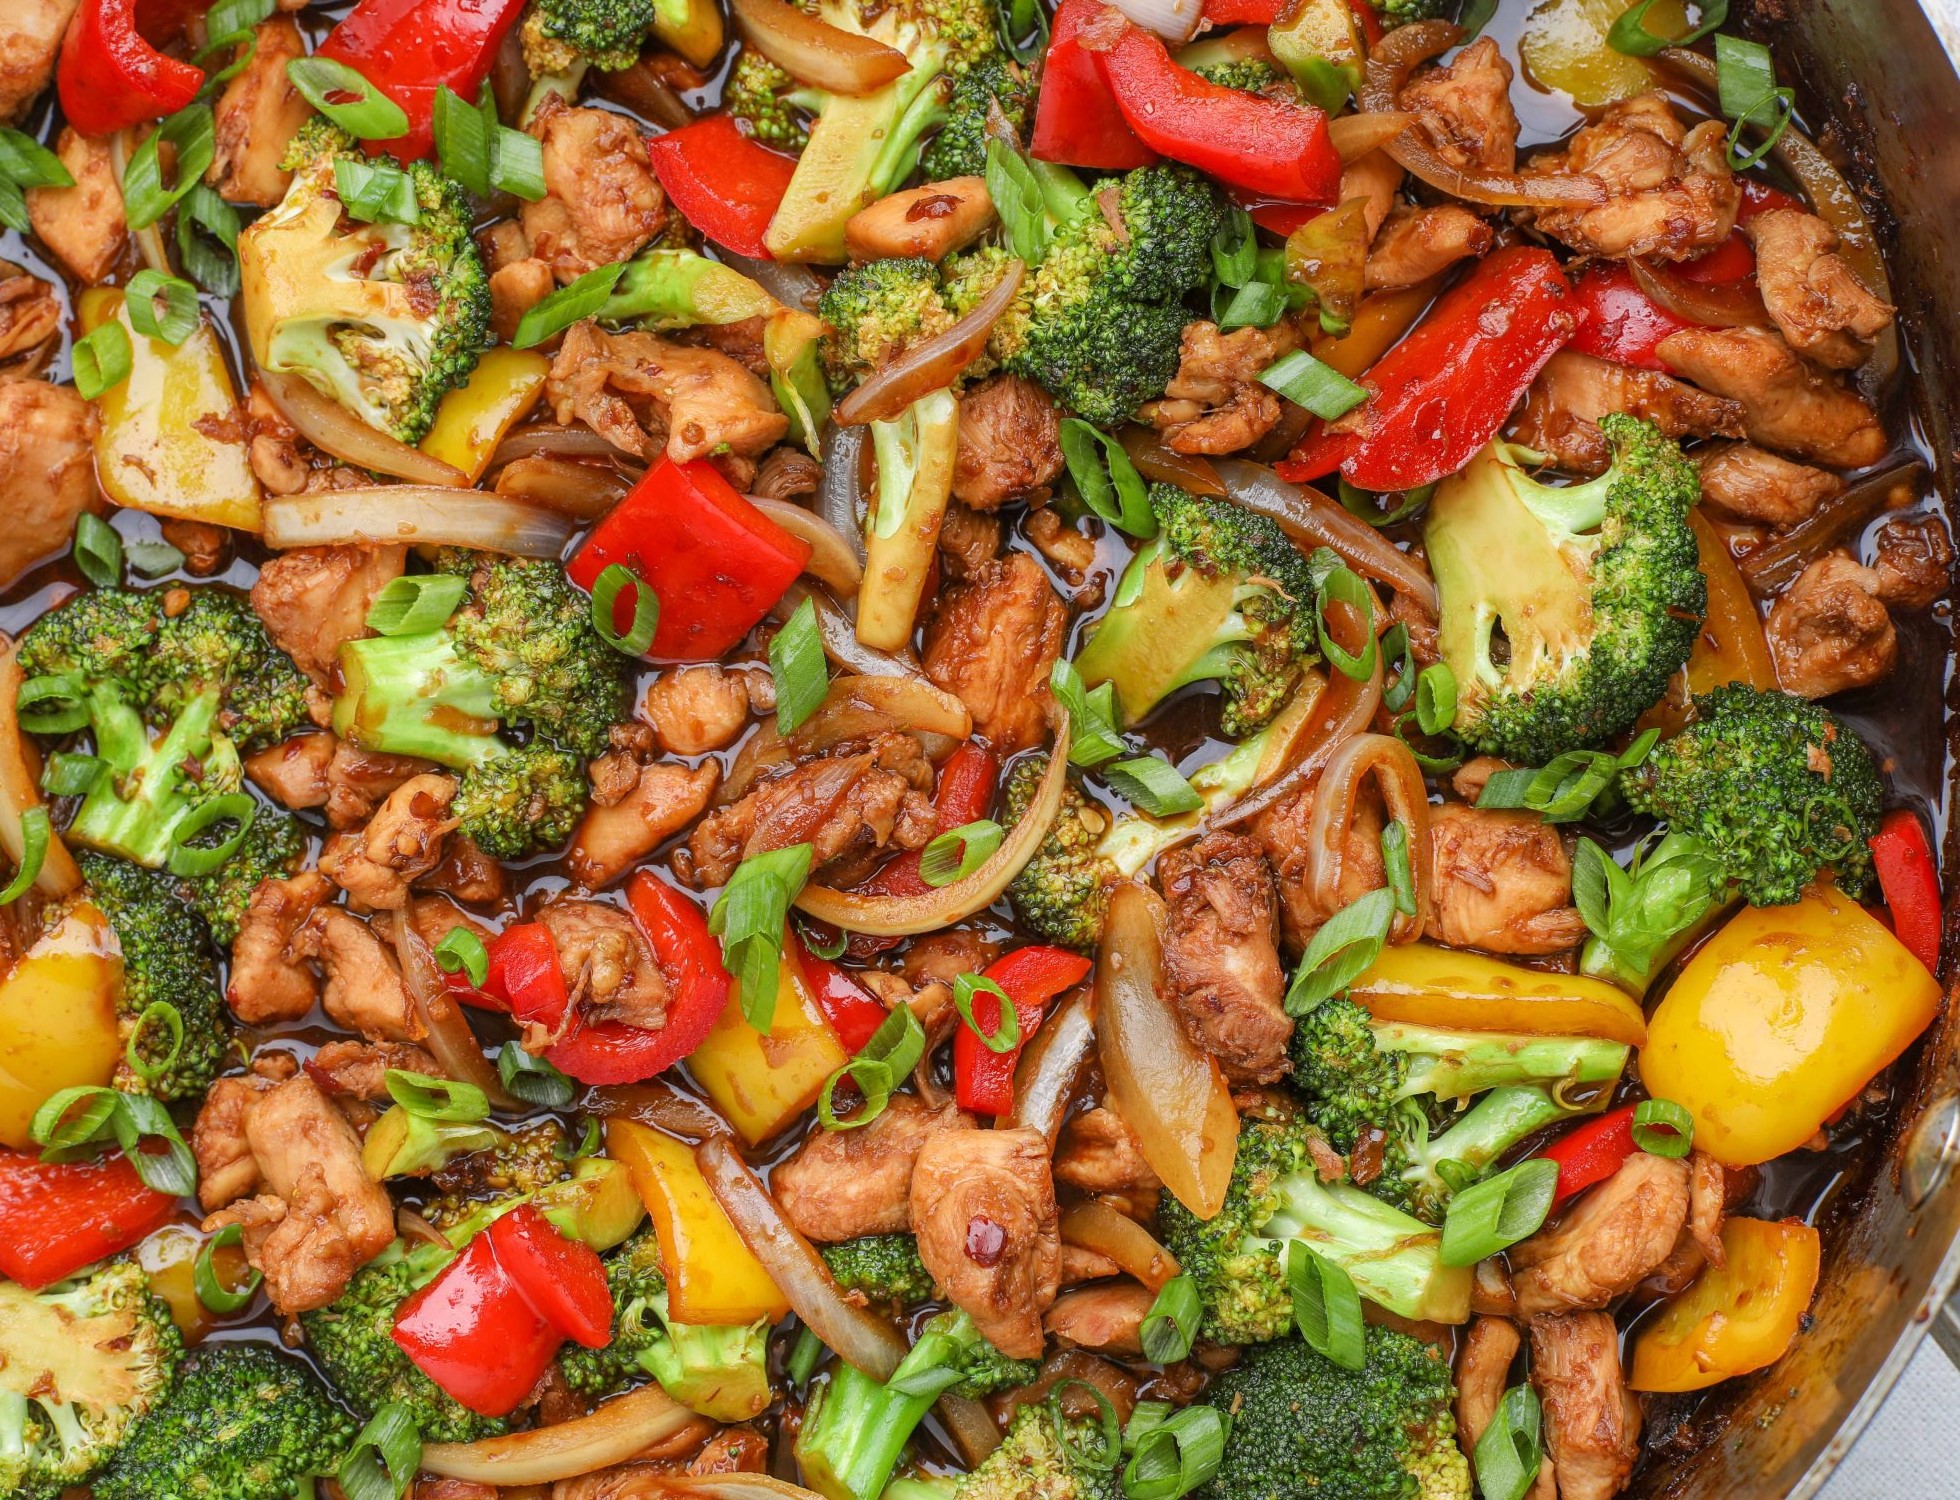 Spicy Chicken and Vegetable Stir-Fry